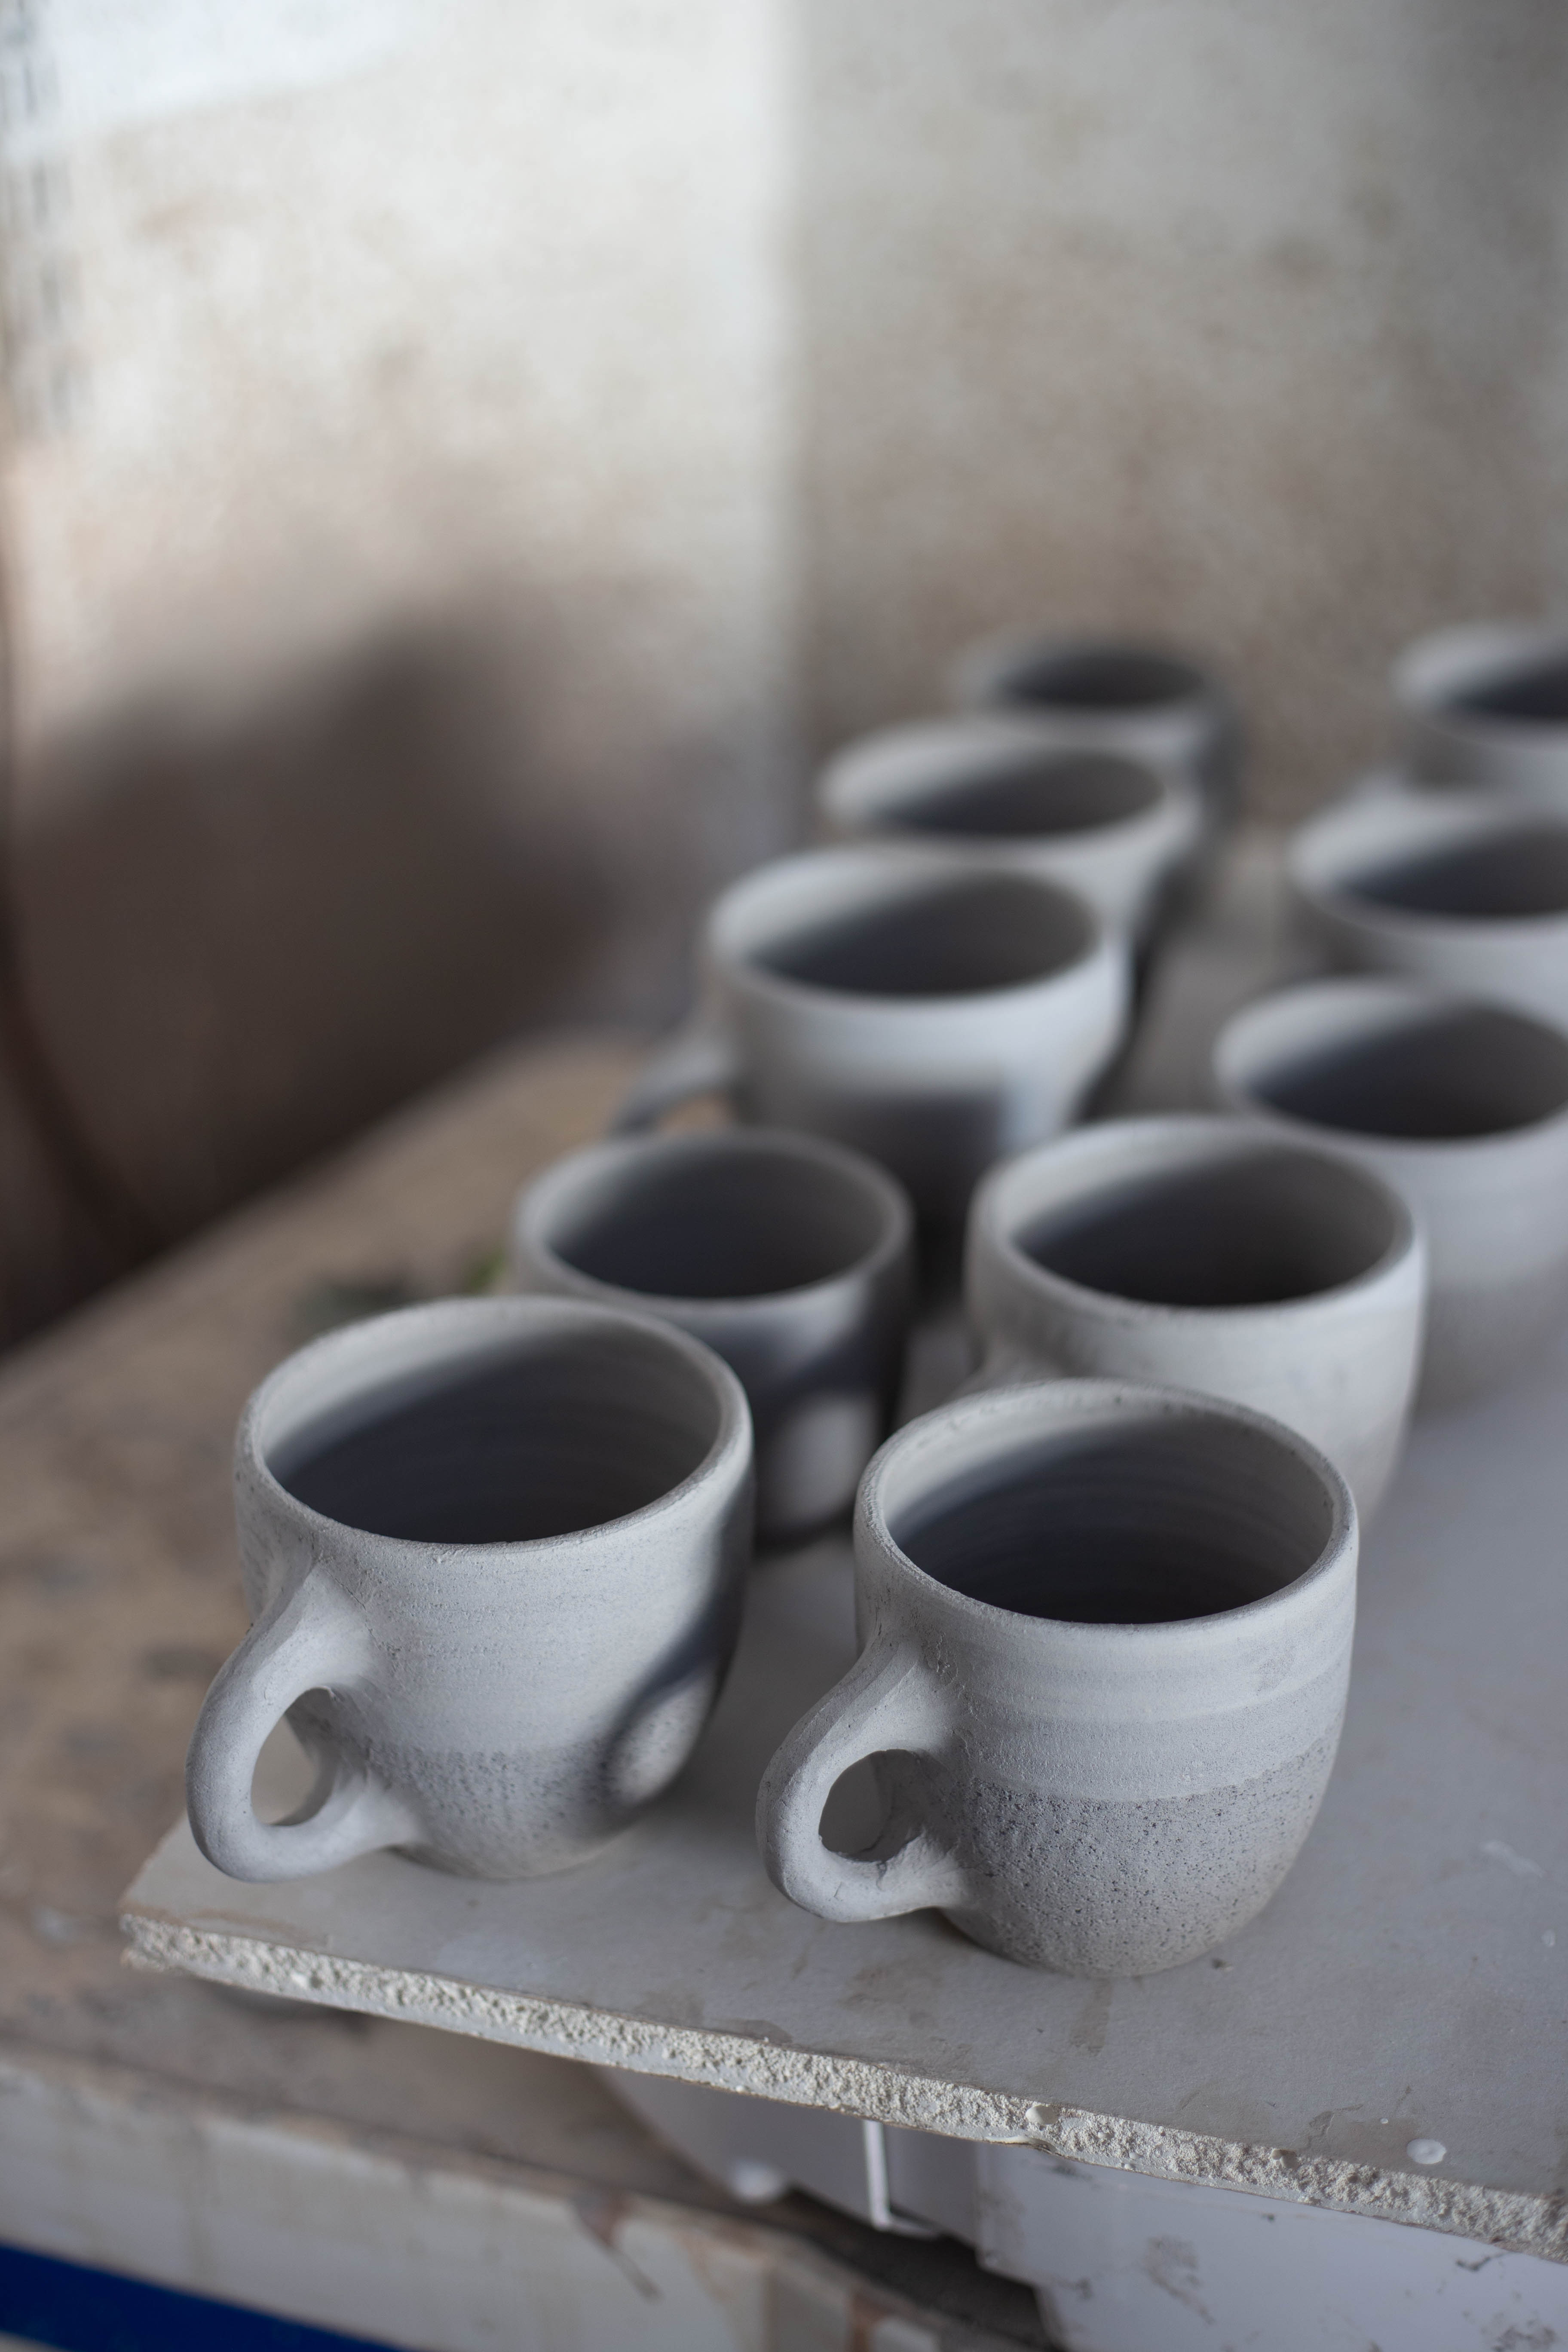 Mugs drying out/>
              </div>
              <div class=